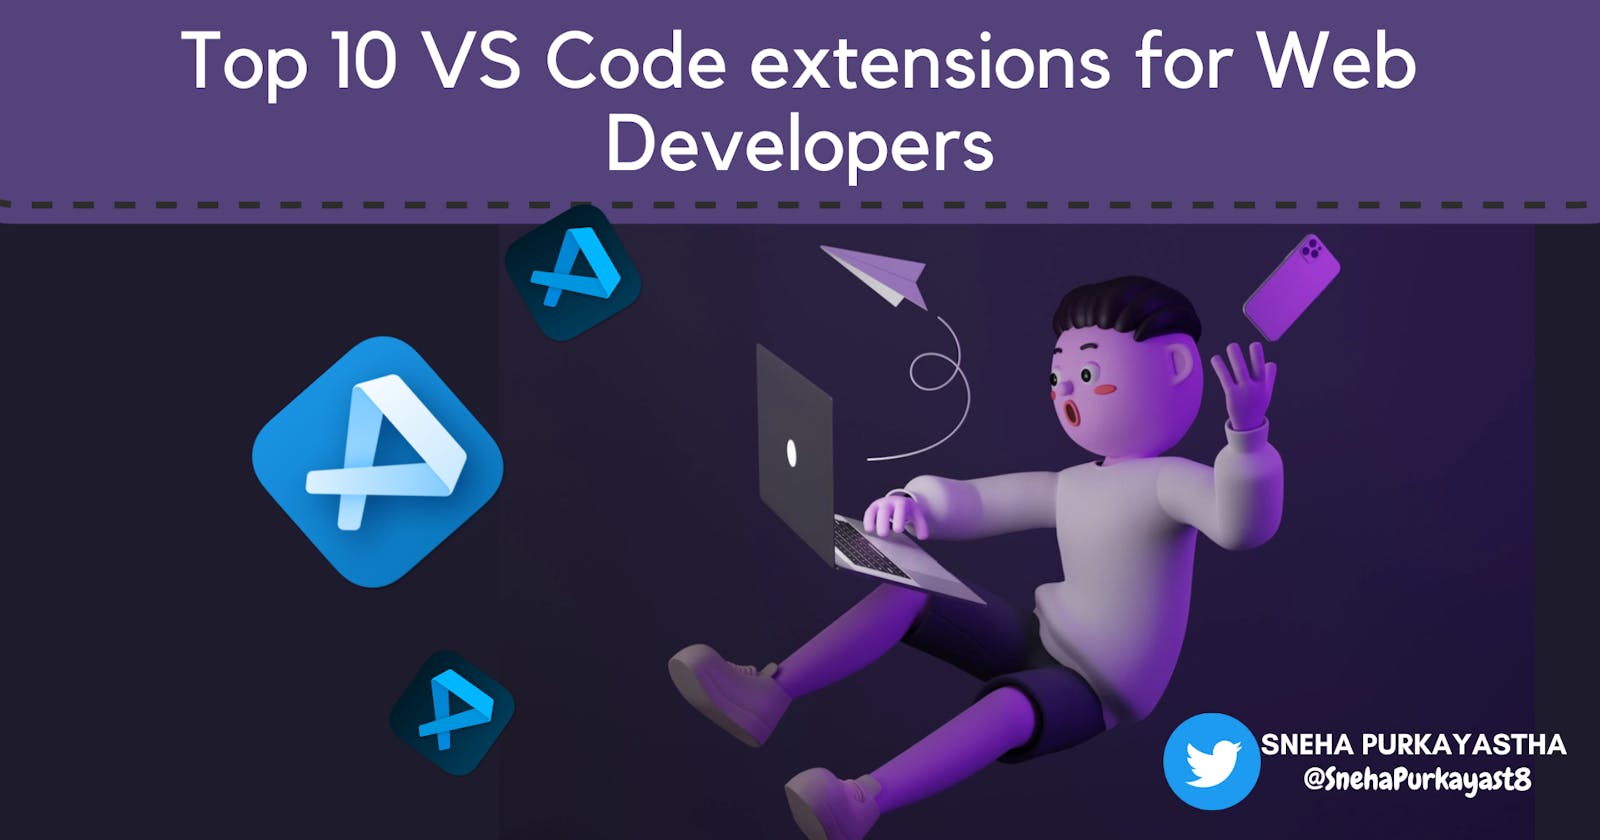 10 Amazing VS Code extensions for Web Developers 🔖